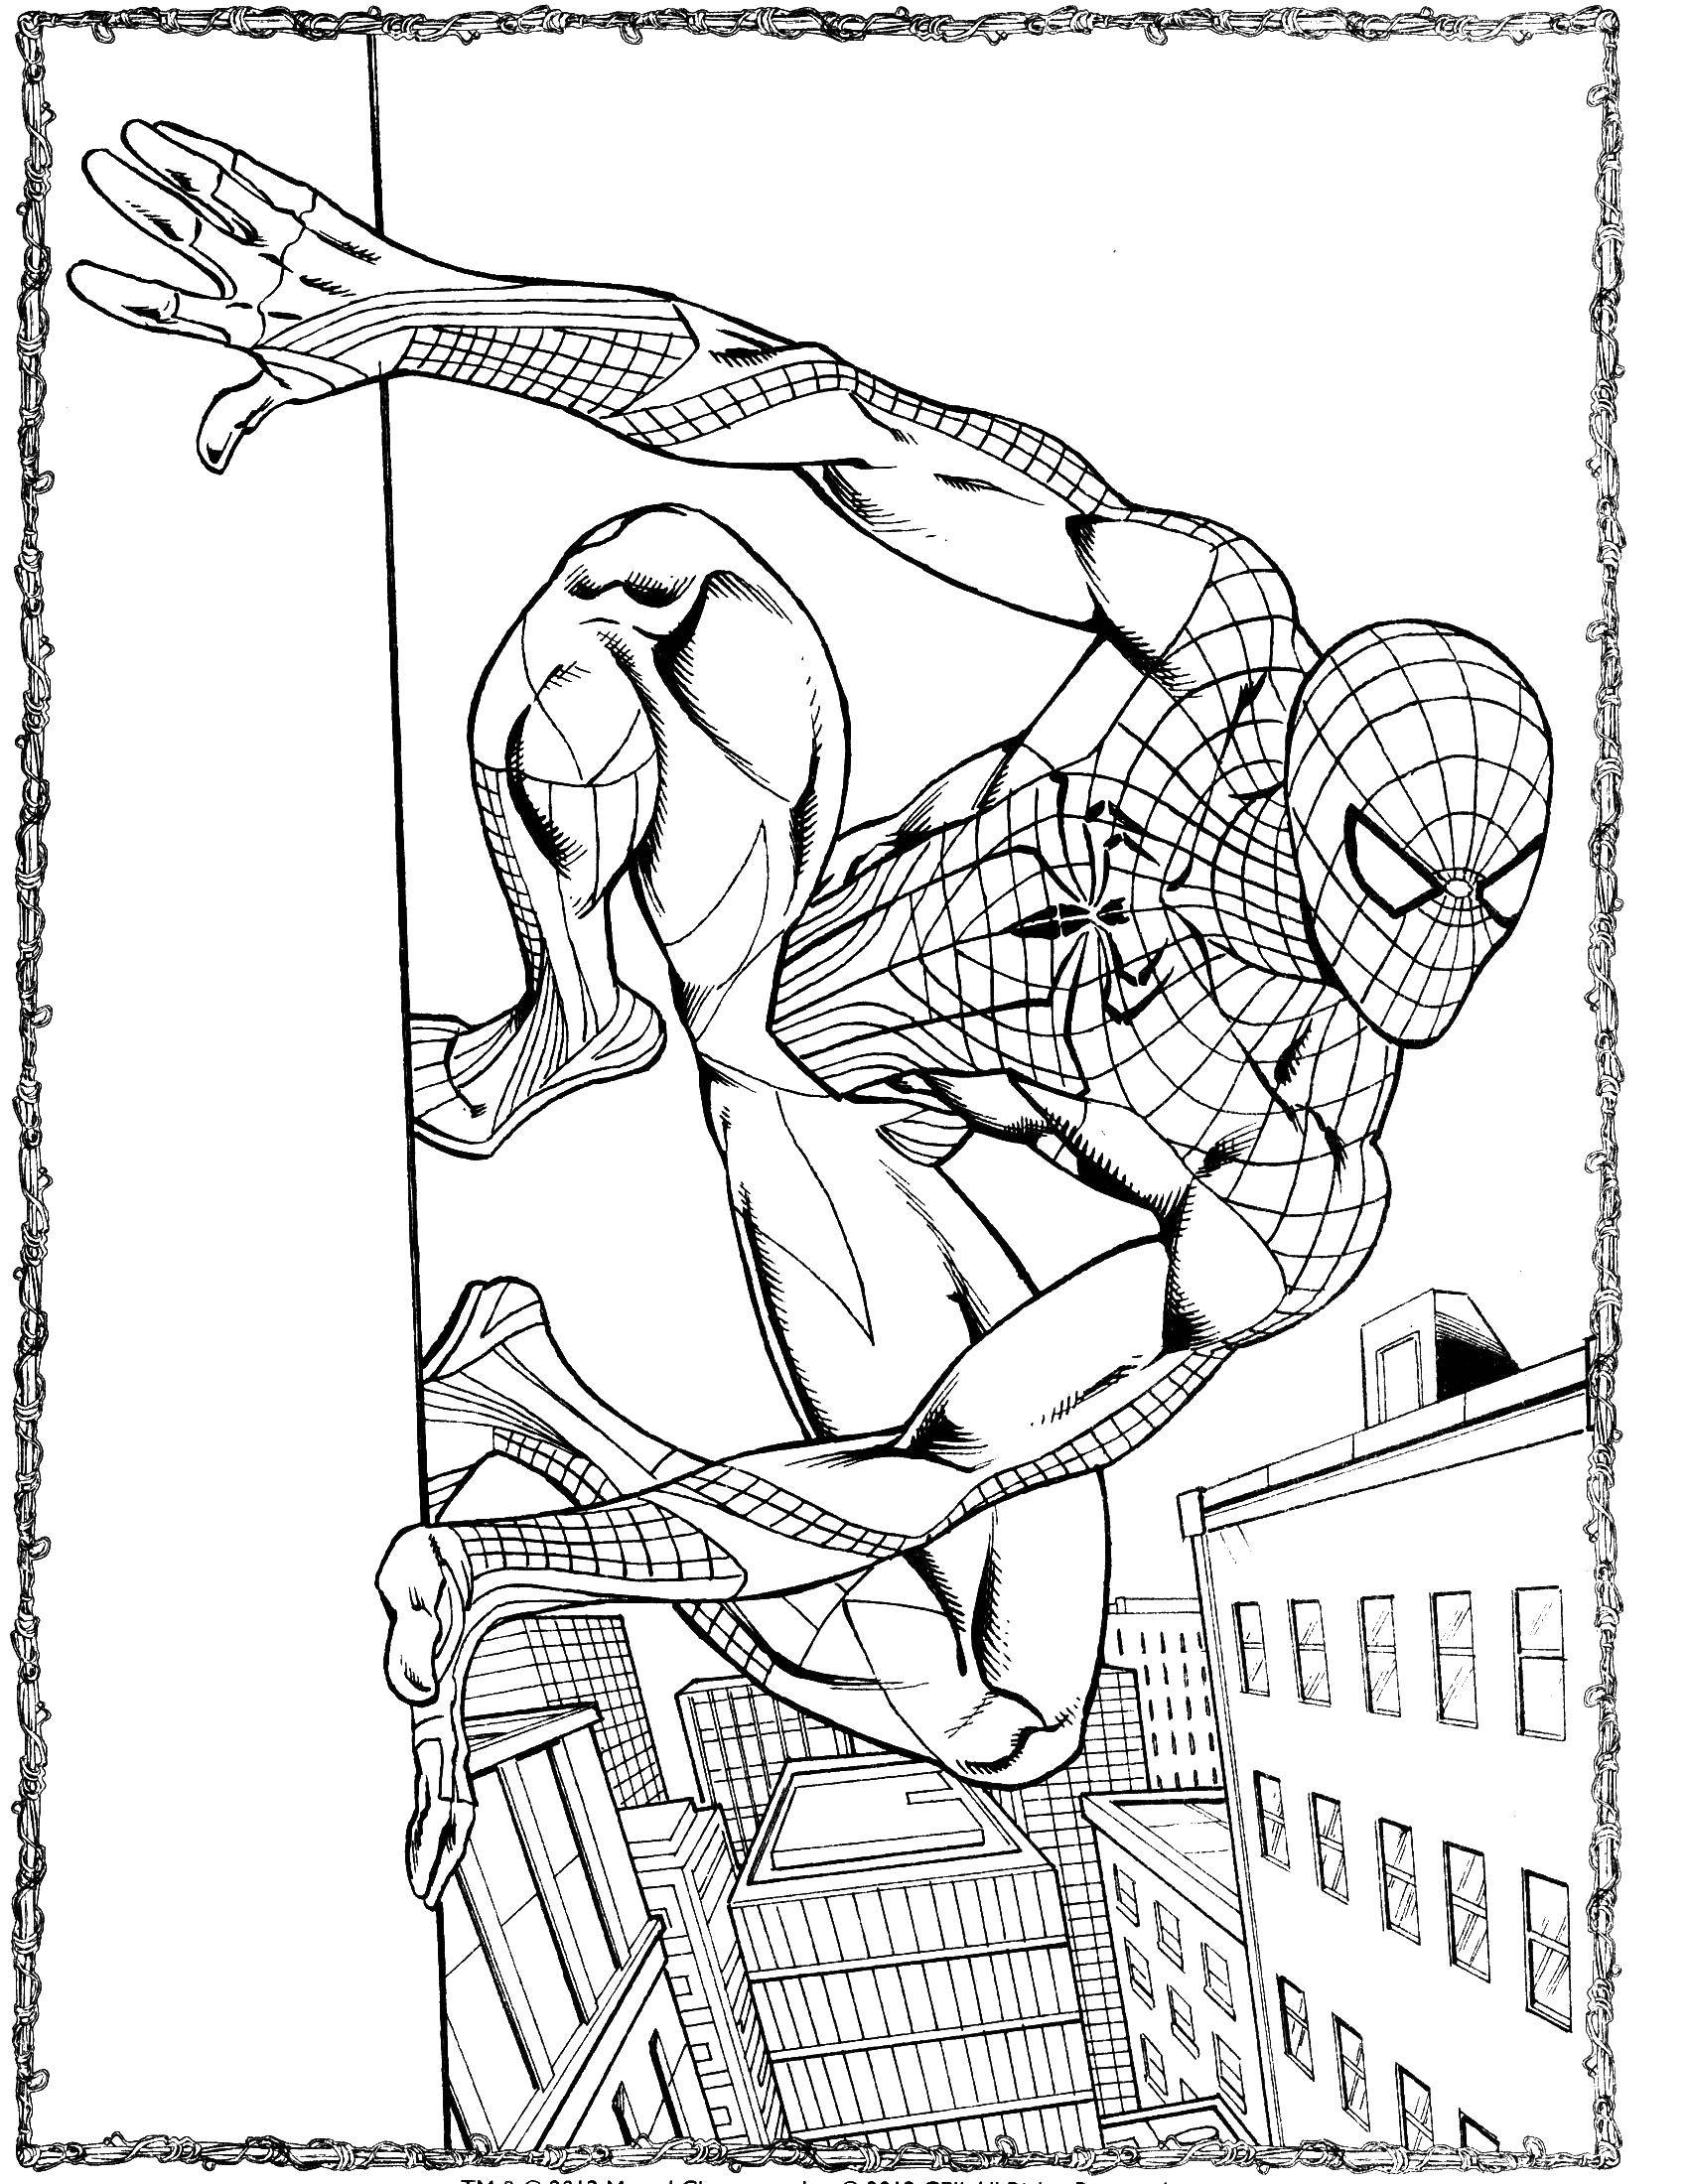 Coloring Spiderman on the wall. Category spider man. Tags:  spider man, superheroes.